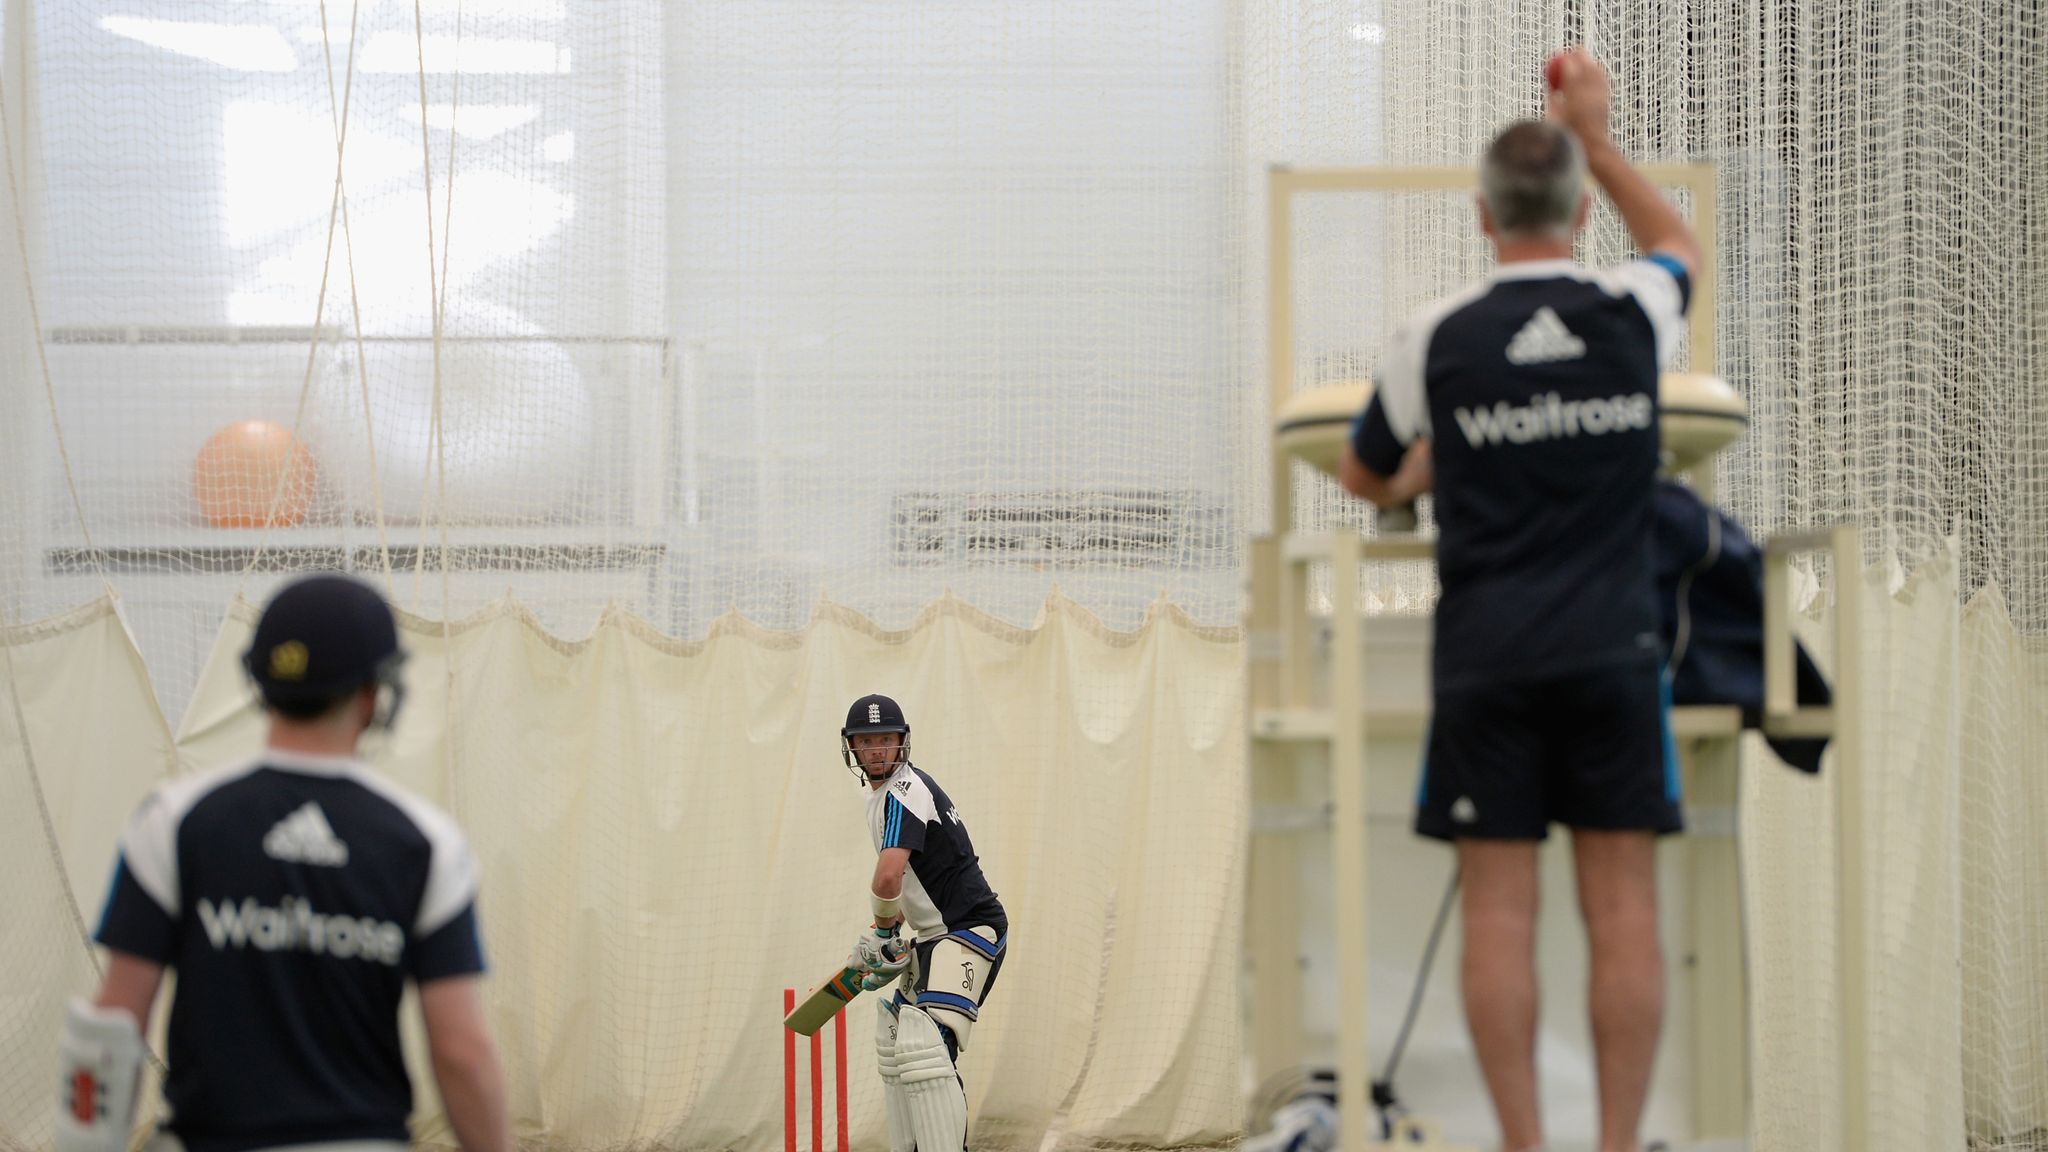 England name 55-man training group with international cricket in mind